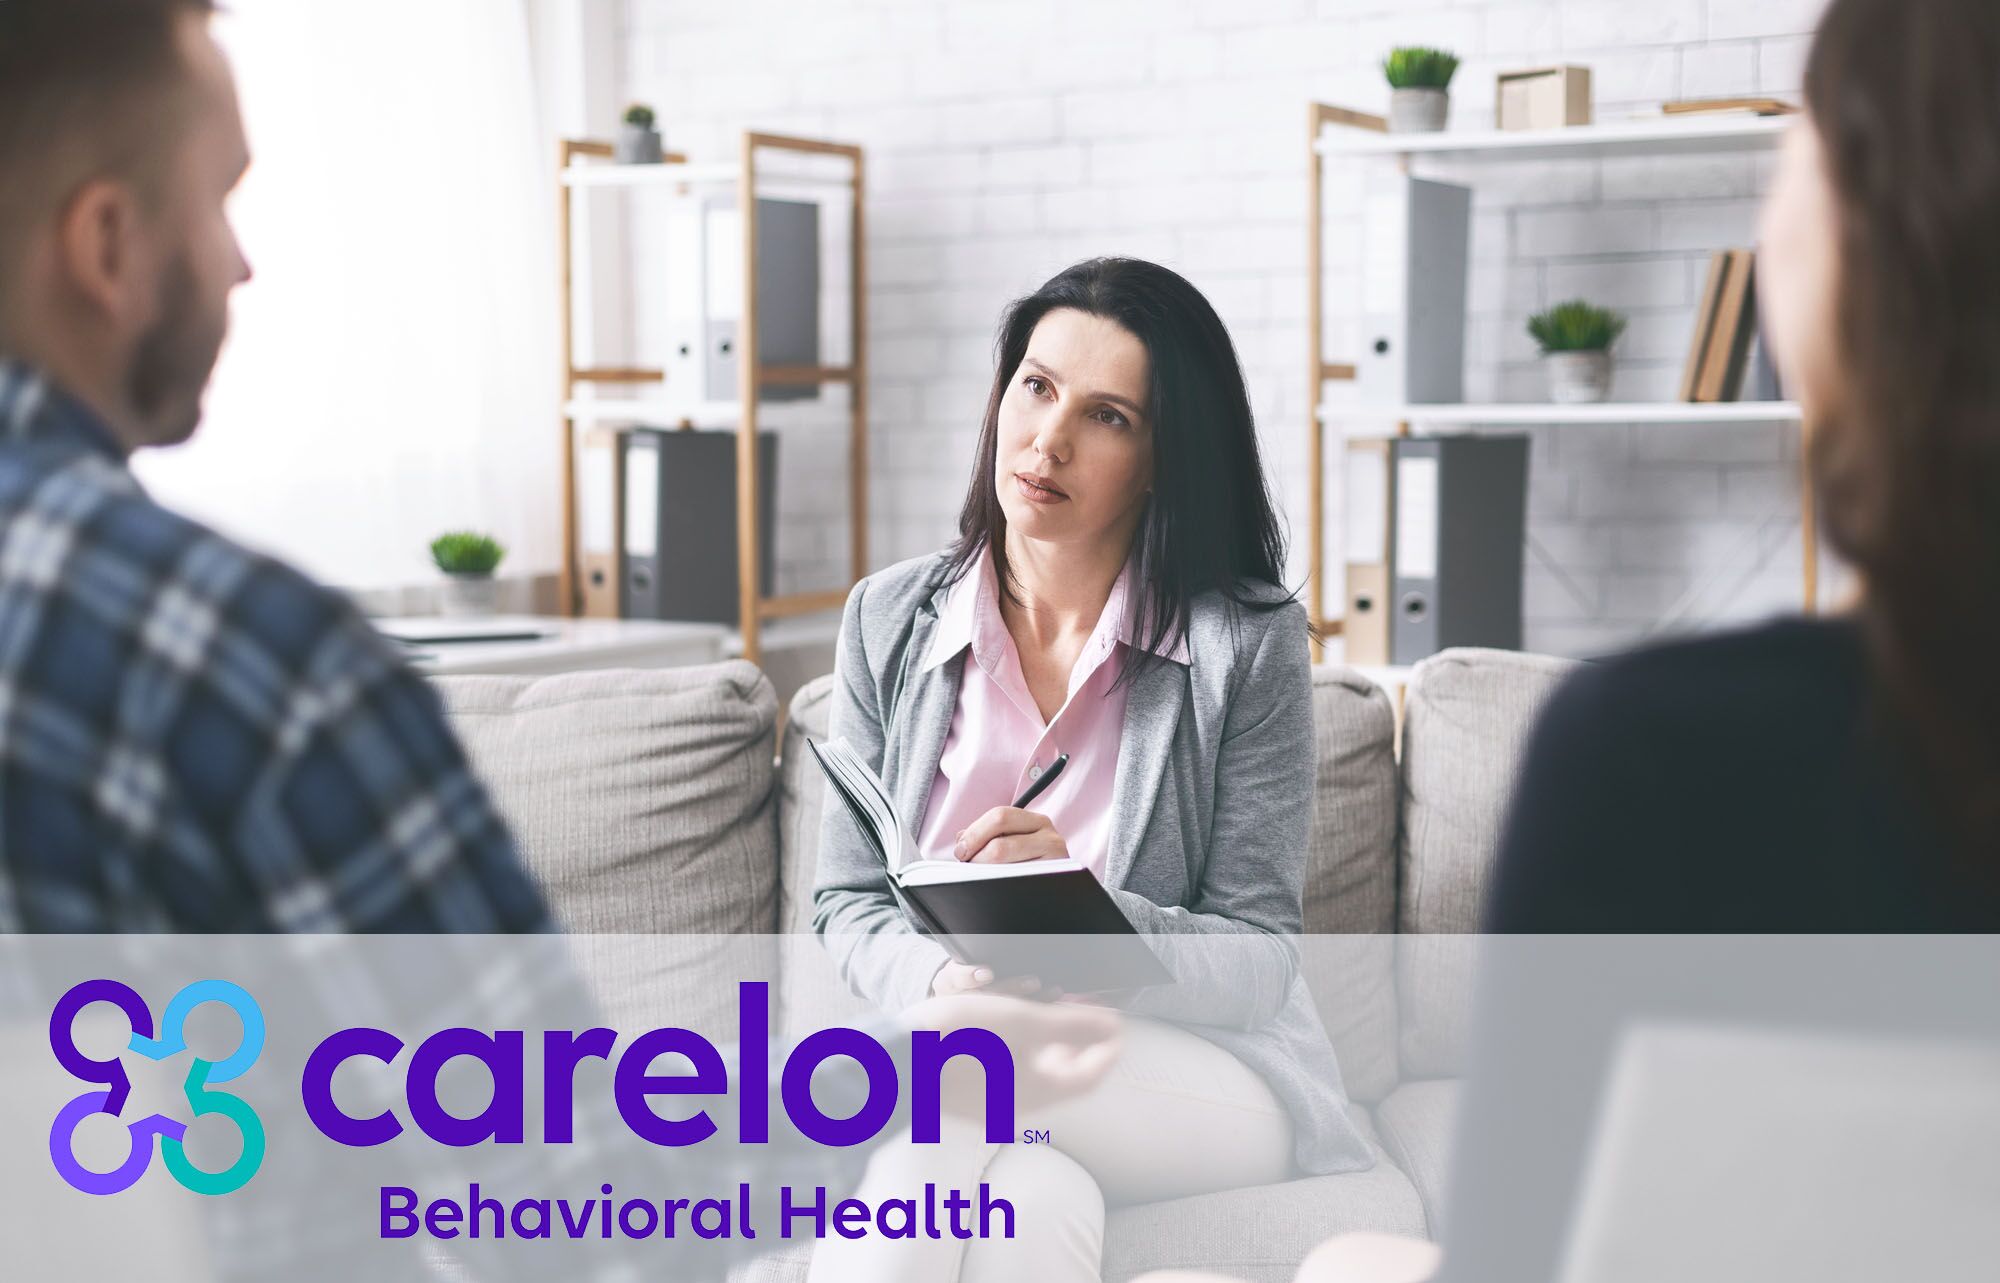 a person with a substance use disorder working with Transformations Treatment Center and their carelon behavioral health plans to cover substance abuse treatment